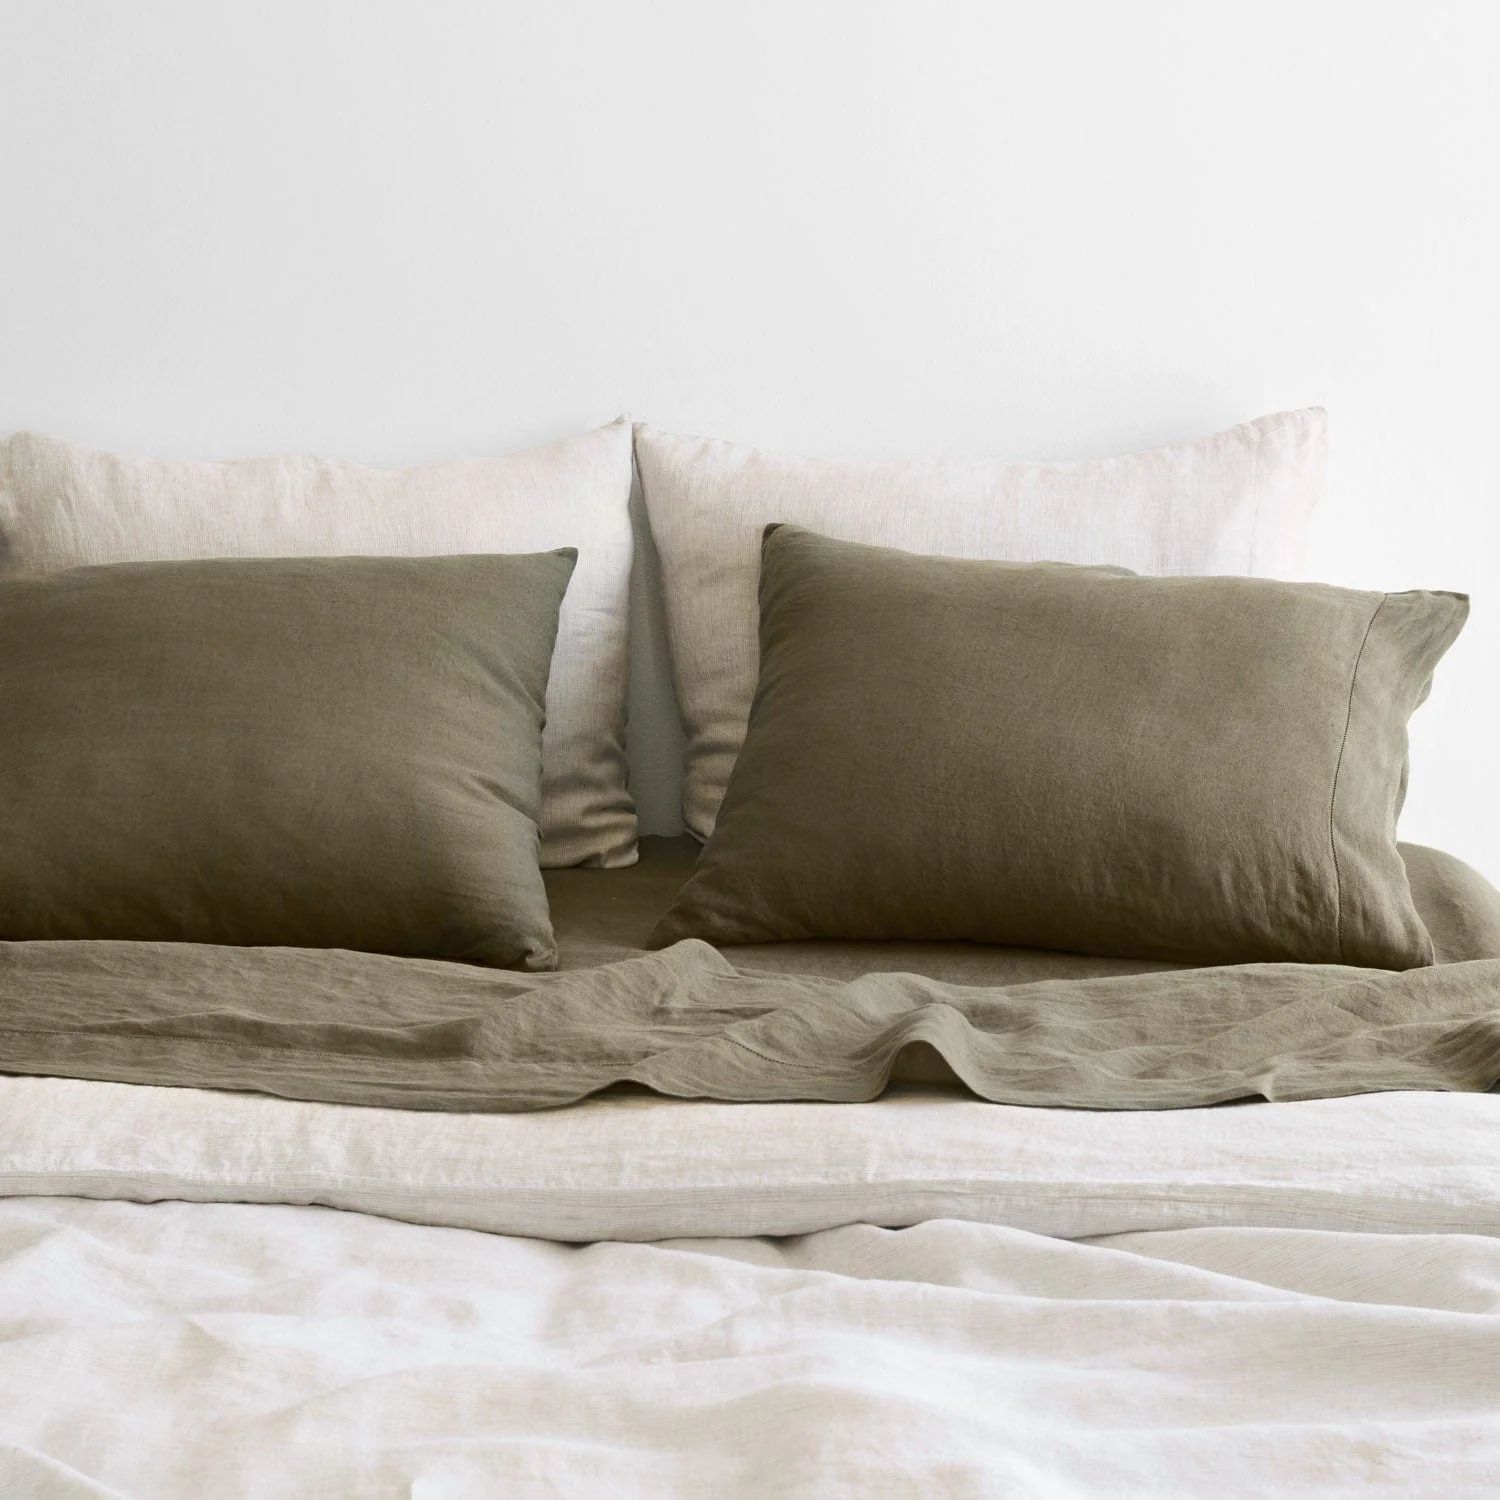 Stonewashed Linen Bed Bundle - Earth Series   – The Citizenry | The Citizenry